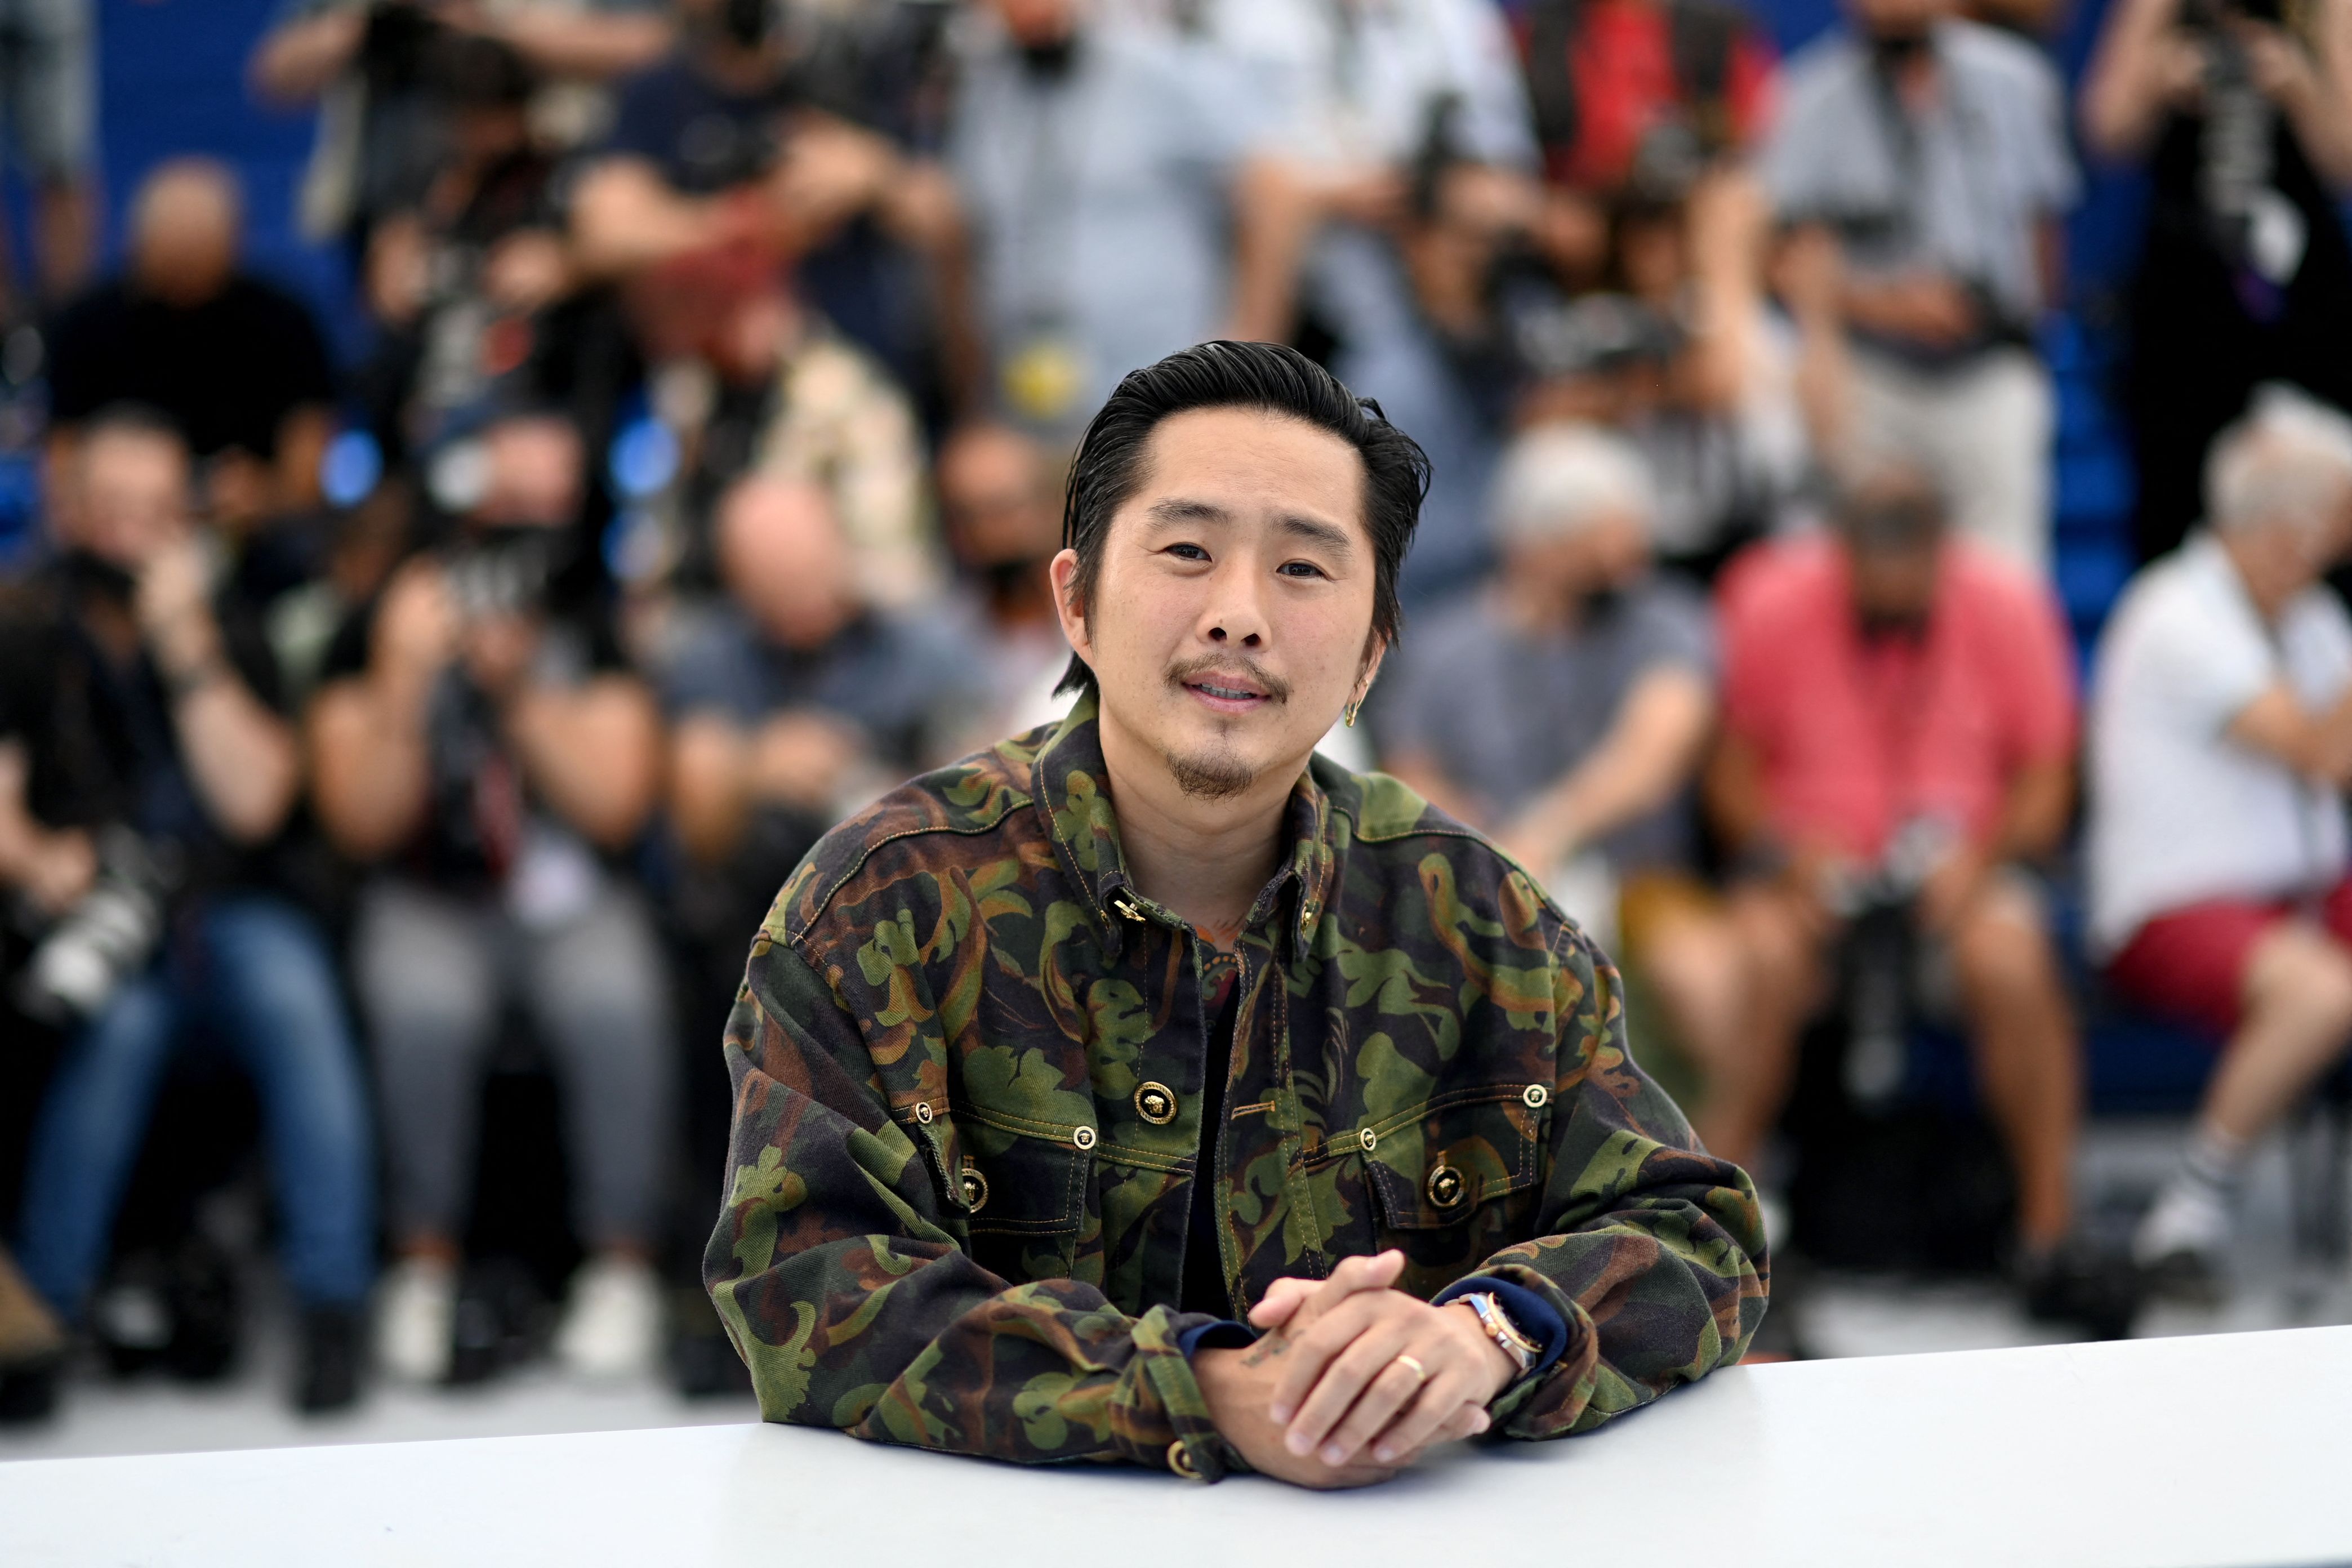 Known as Erick Yorkie from Twilgiht, Justin Chon promotes his new film Blue Bayou at the Cannes Festival, which is where attendees got to watch Blue Bayou for the first time